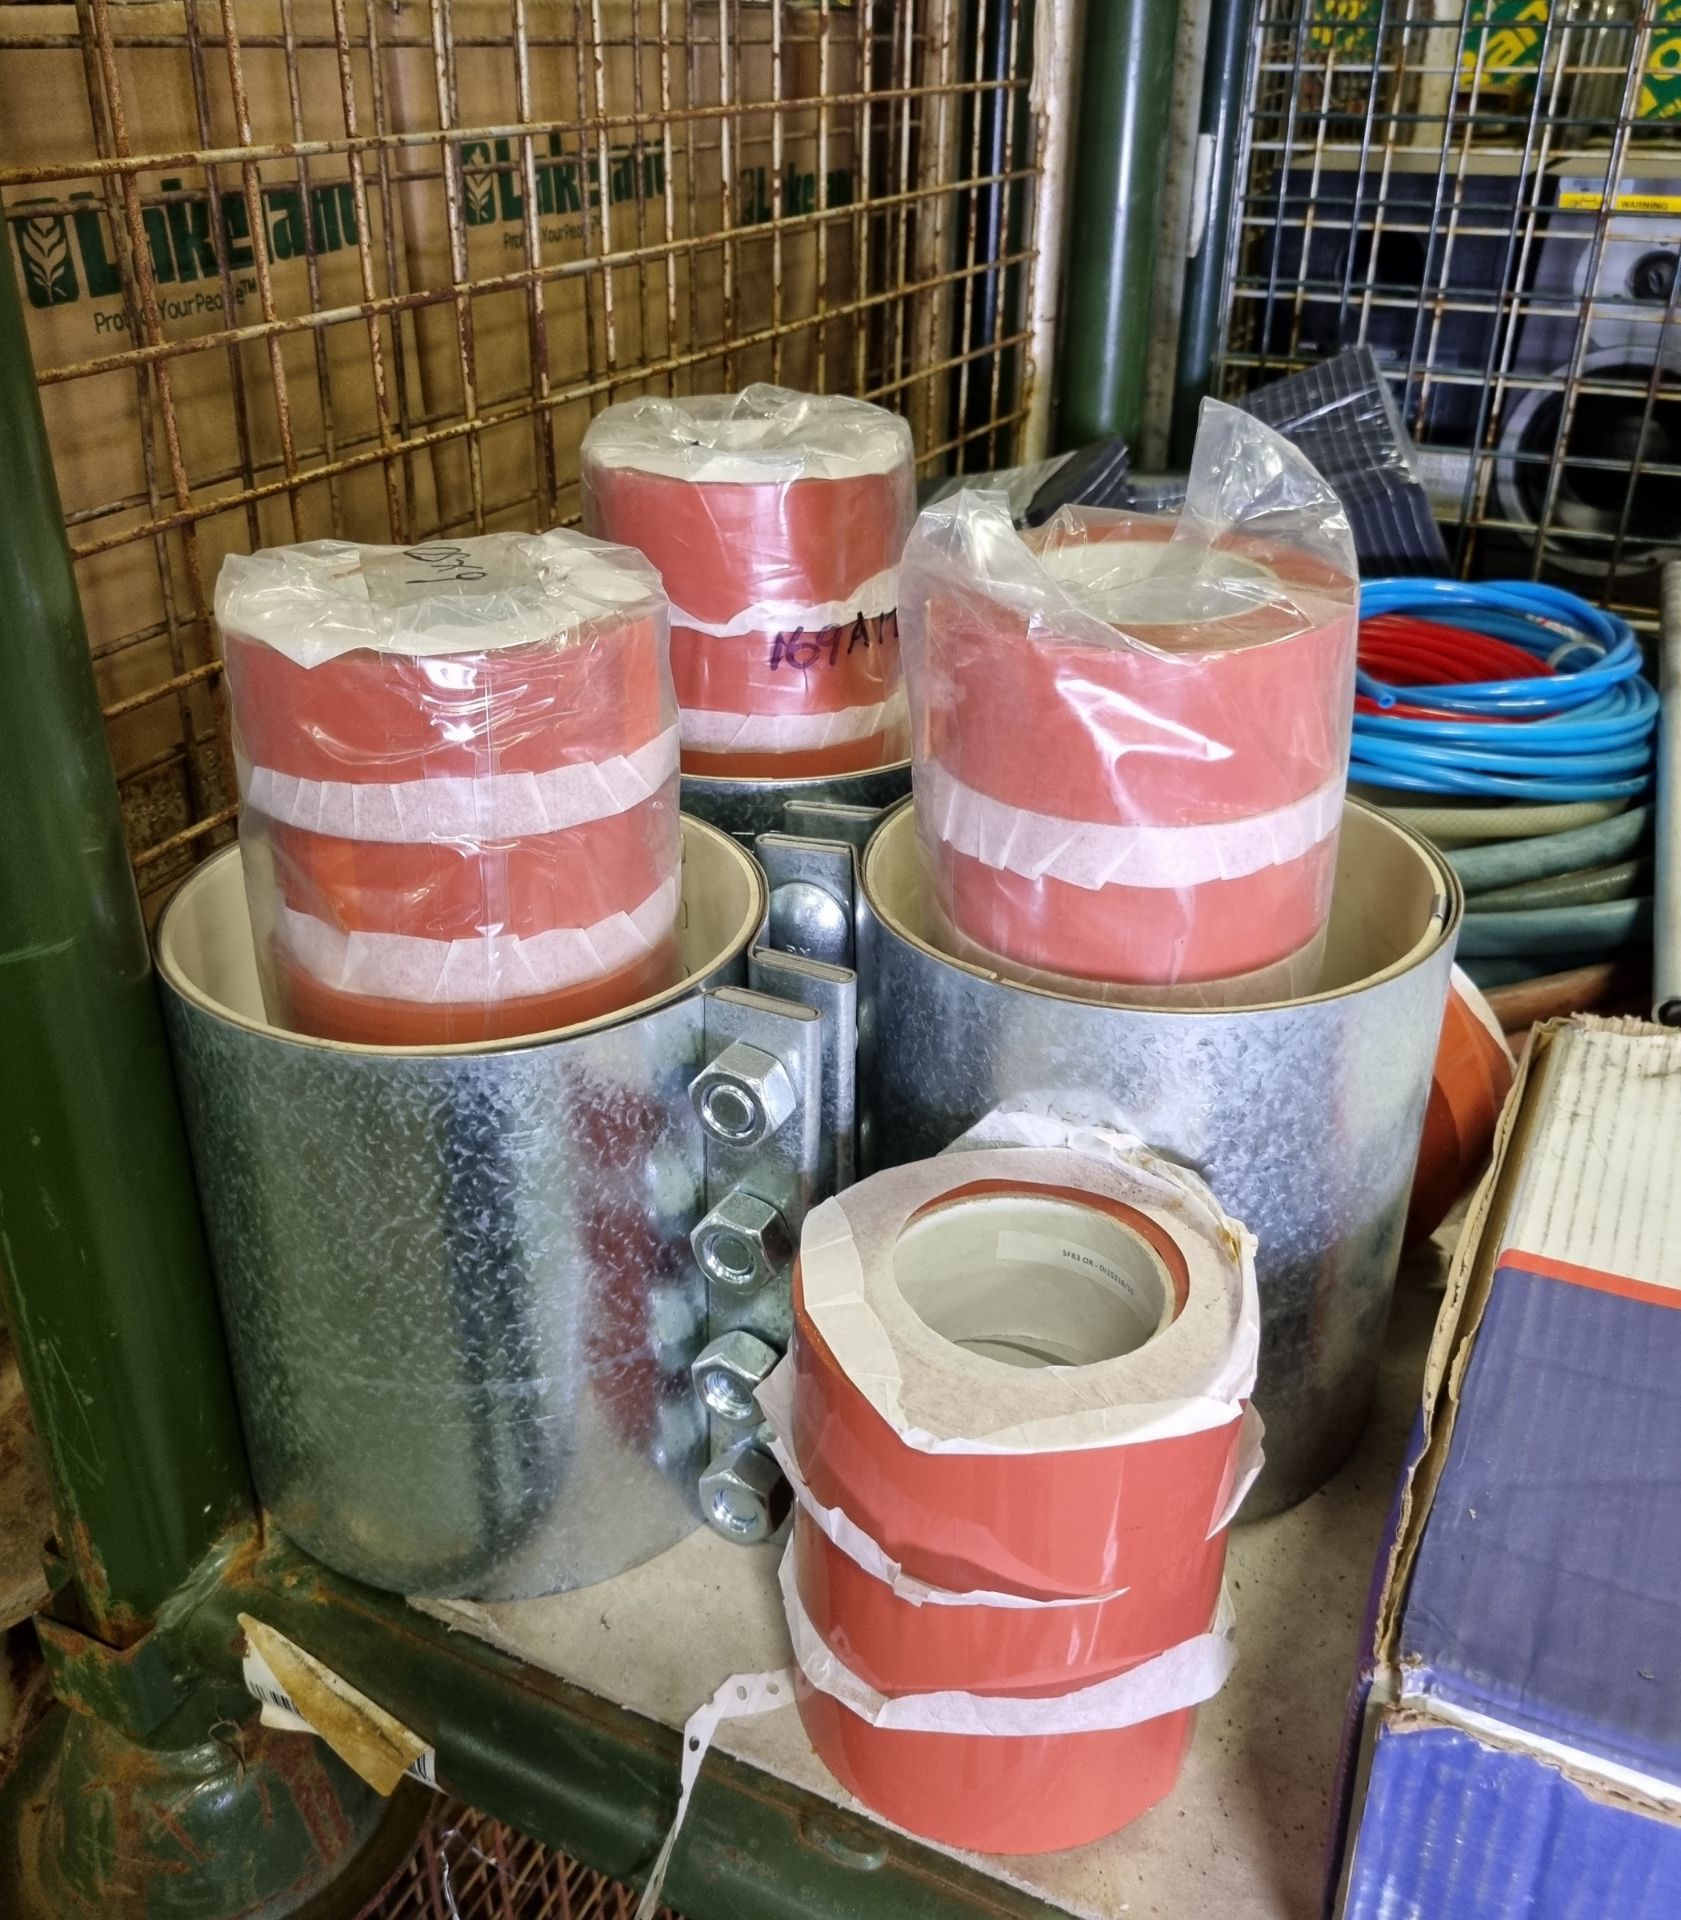 Workshop supplies and consumables - asbestos waste bags, hazard tape, air line, pressure hose - Image 3 of 6